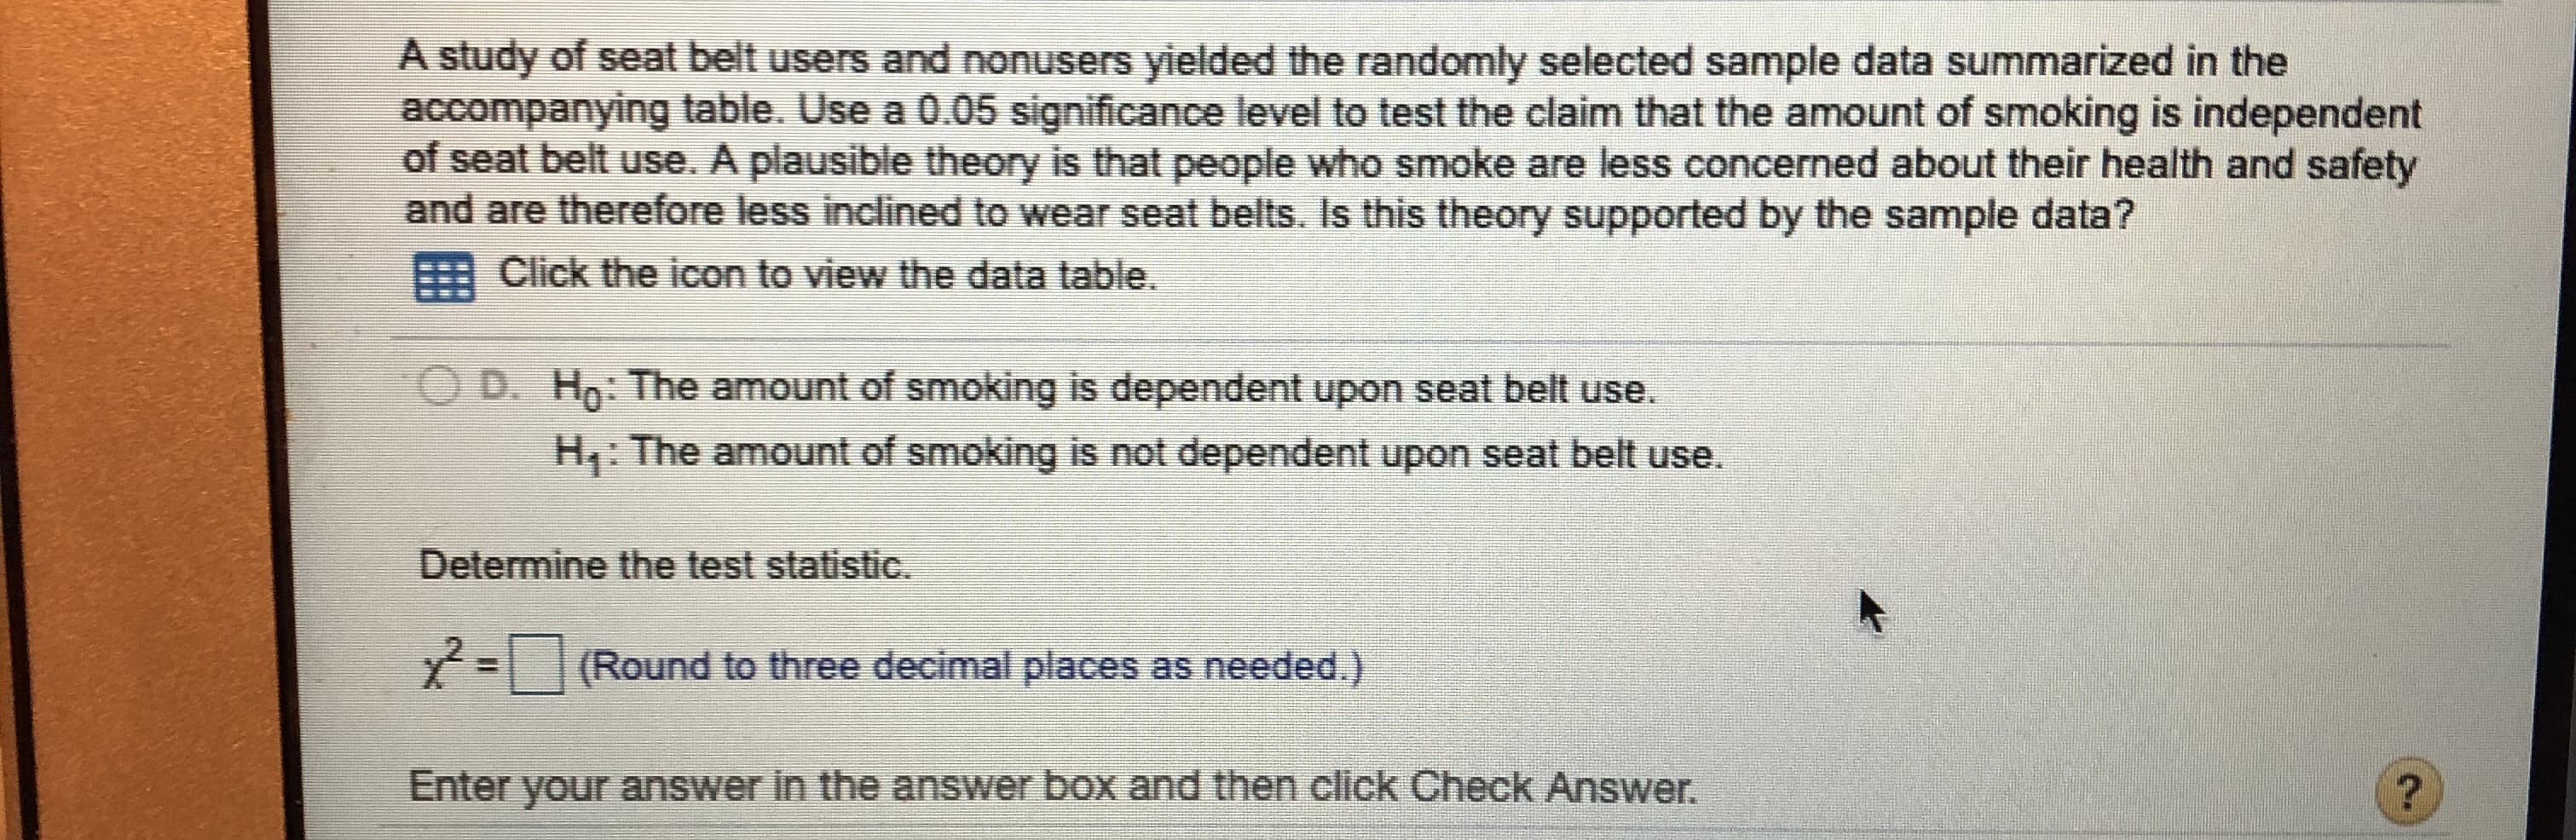 A study of seat belt users and nonusers yielded the randomly selected sample data summarized in the
accompanying table. Use a 0.05 significance level to test the claim that the amount of smoking is independent
of seat belt use. A plausible theory is that people who smoke are less concerned about their health and safety
and are therefore less inclined to wear seat belts. Is this theory supported by the sample data?
